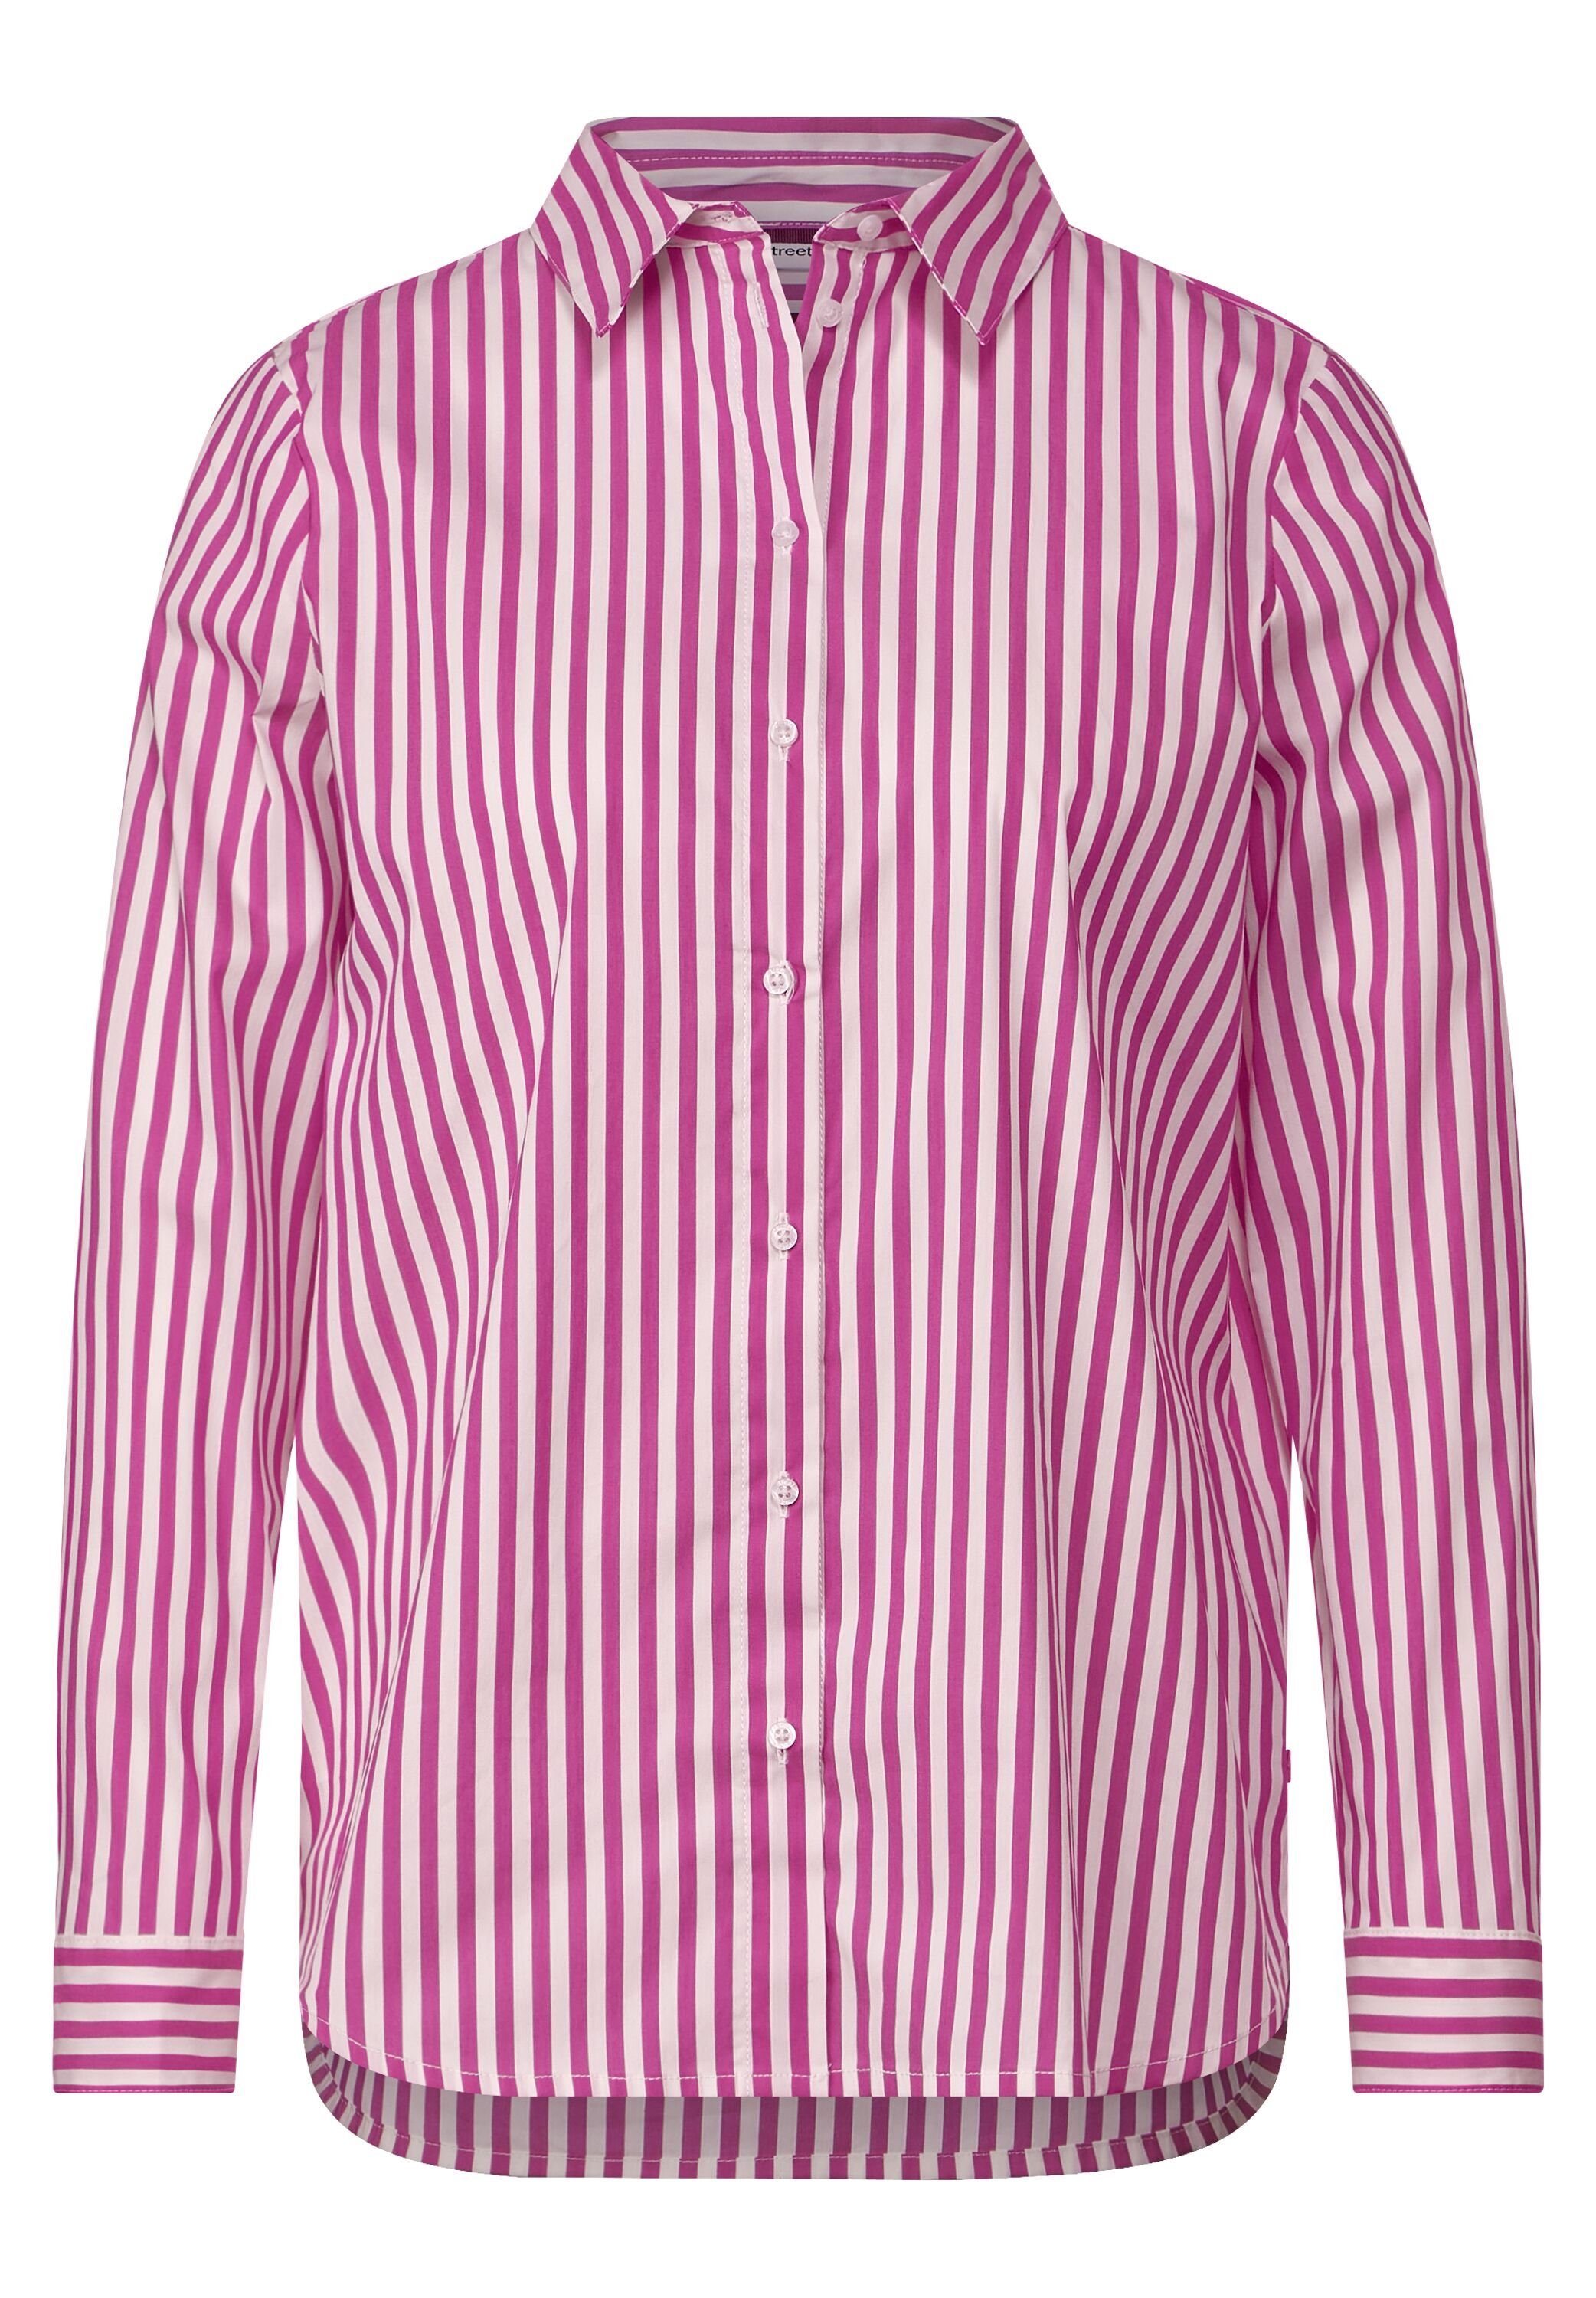 Blouse Striped cozy STREET mit Longbluse pink ONE Office Streifenmuster bright